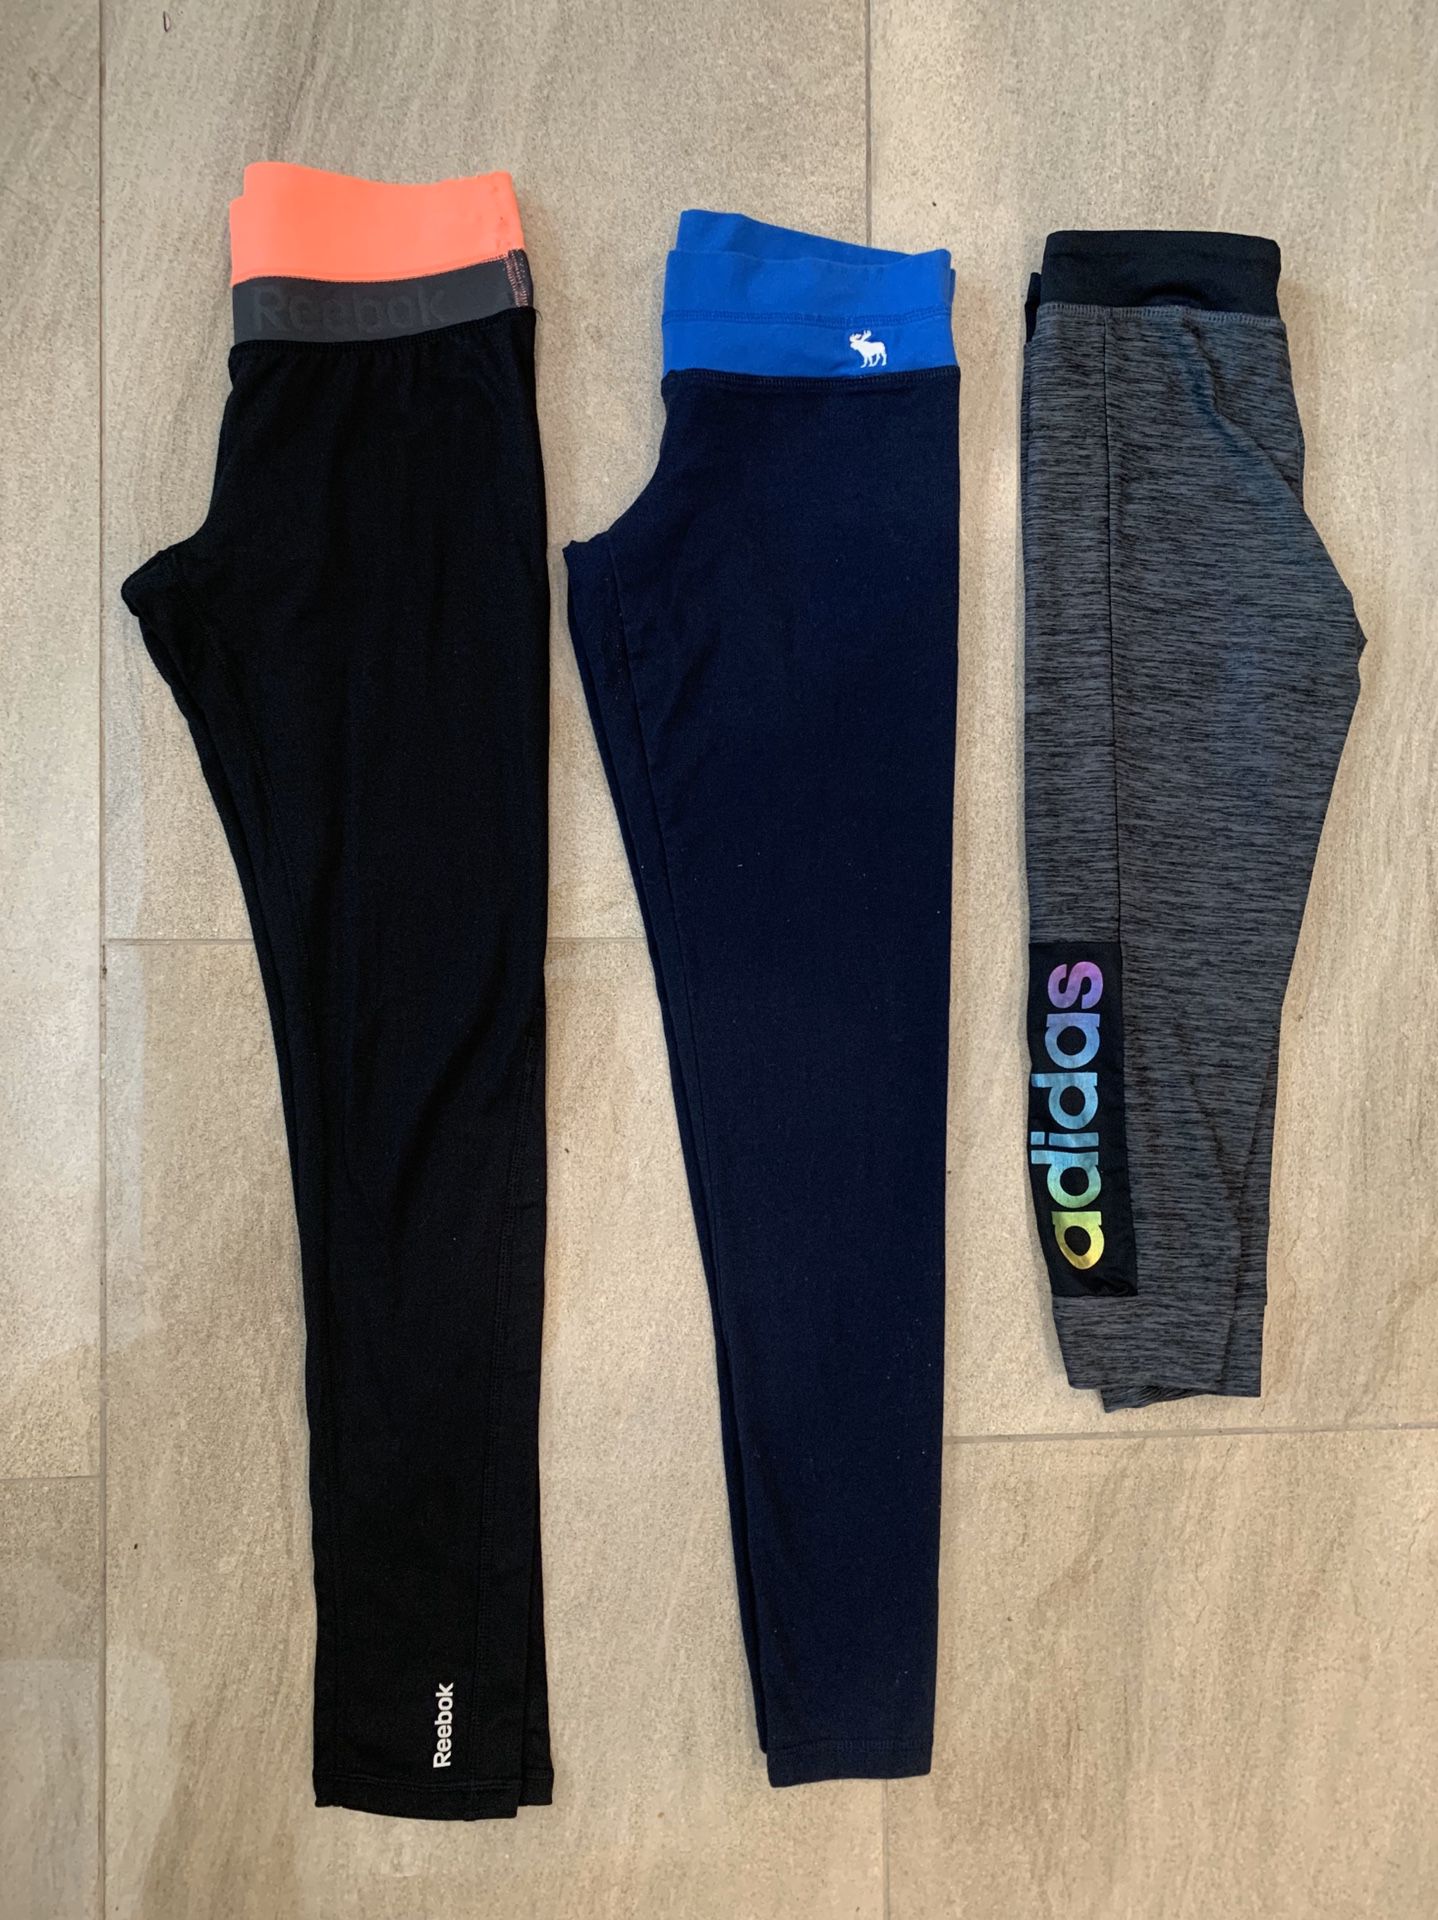 Workout clothes XS -small